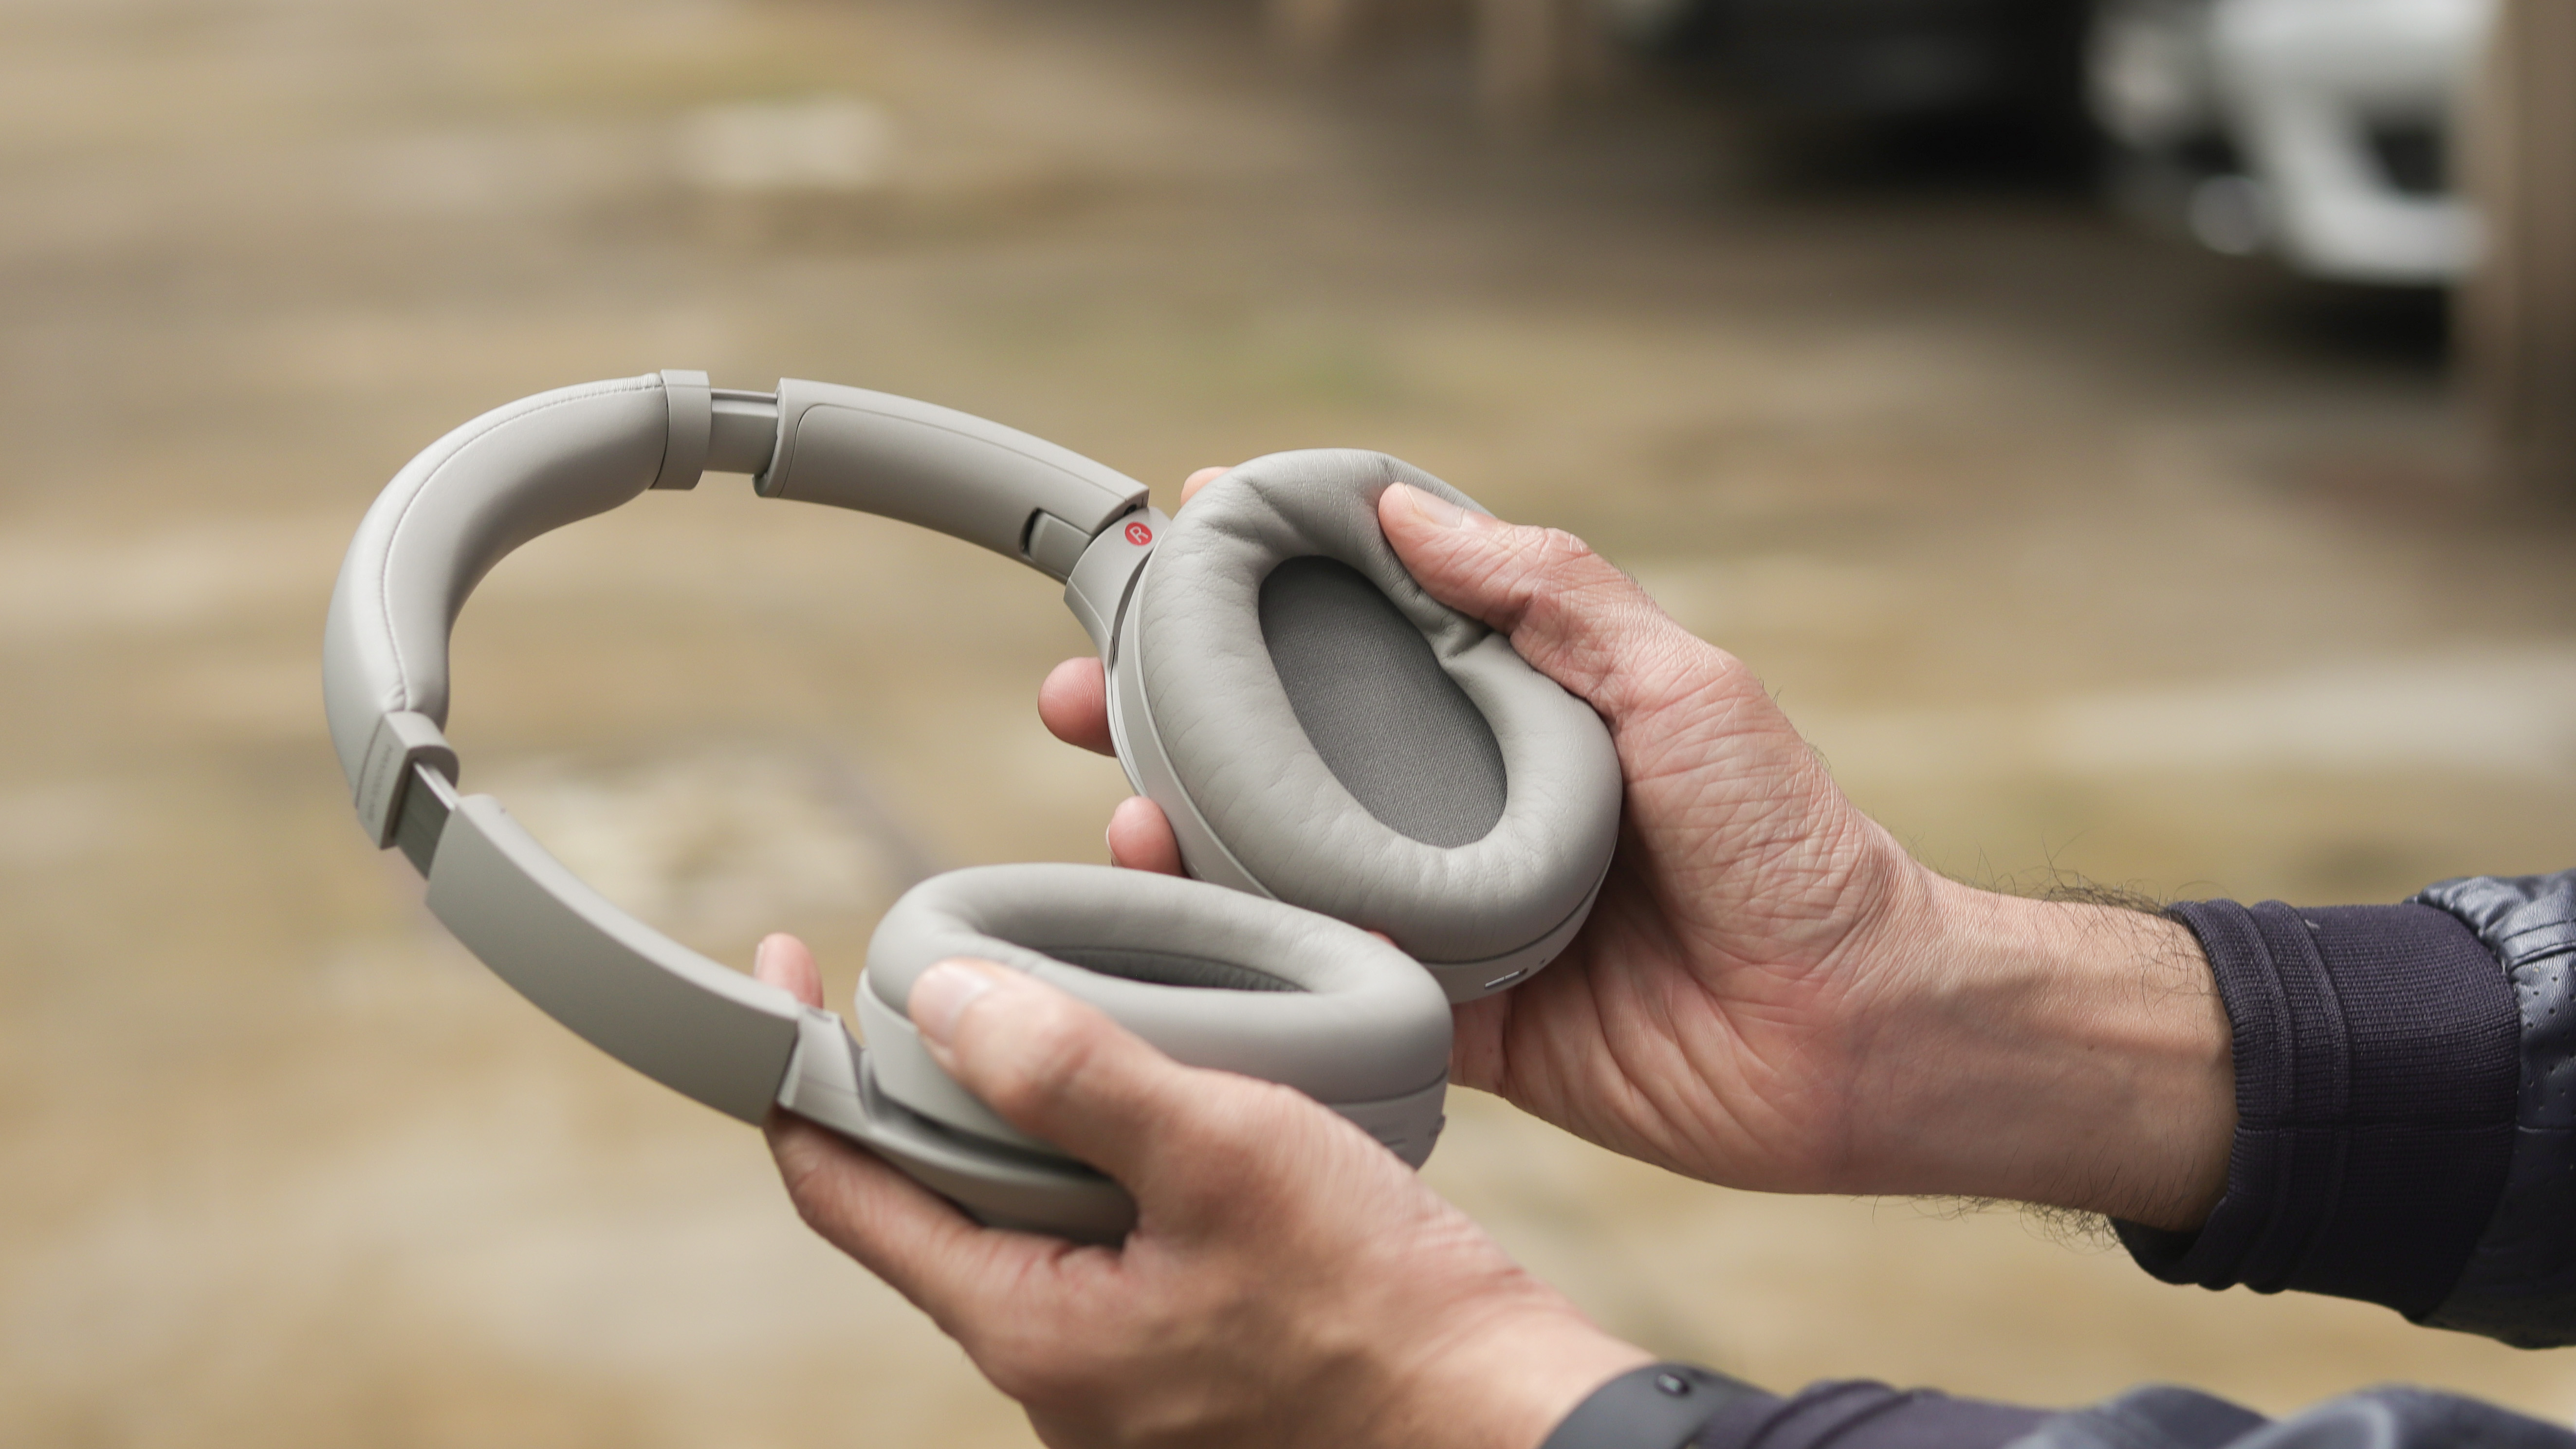 Sony's XM5 headphones are over $100 off thanks to 's New Year's sale -  The Verge